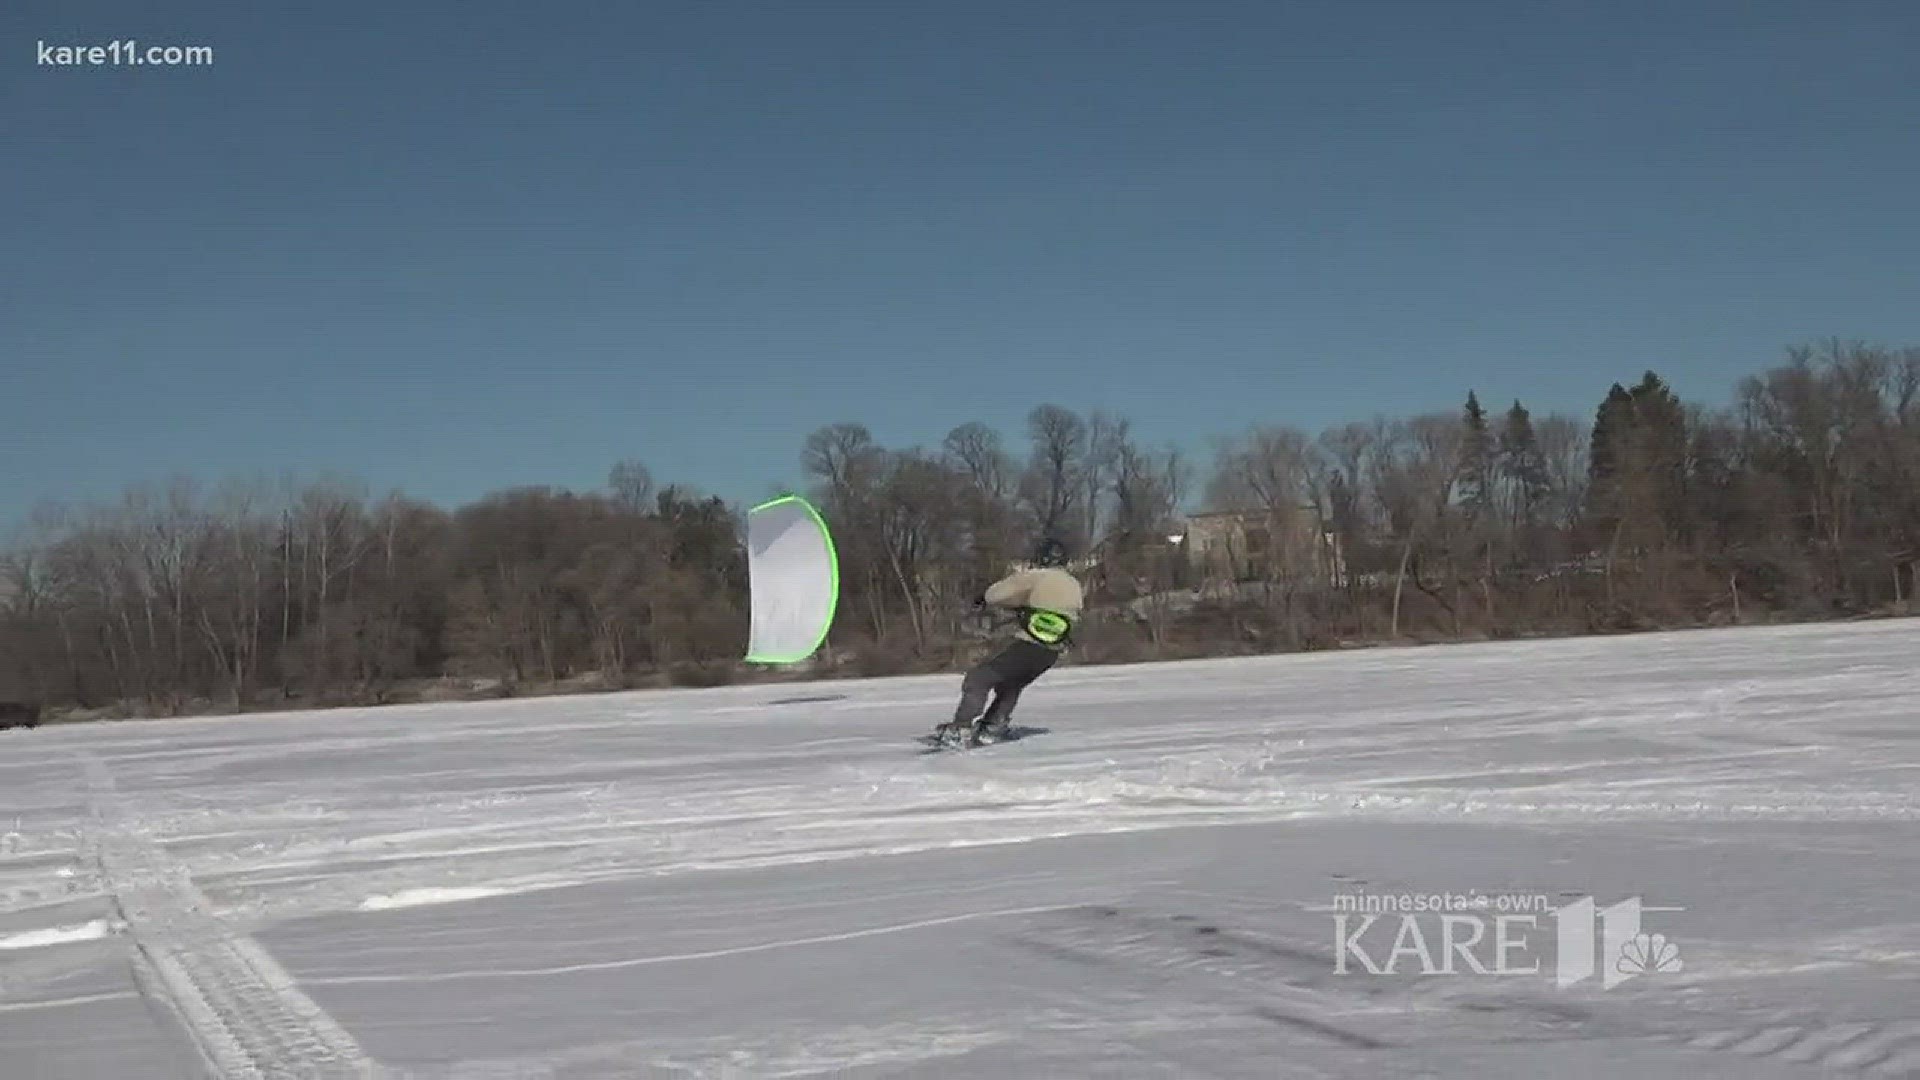 Gearing up for the Super Bowl, we wanted to show off some other popular sports in Minnesota -- including the unusual ones. There are plenty of places to ski and snowboard across our area, but have you ever tried snowkiting?